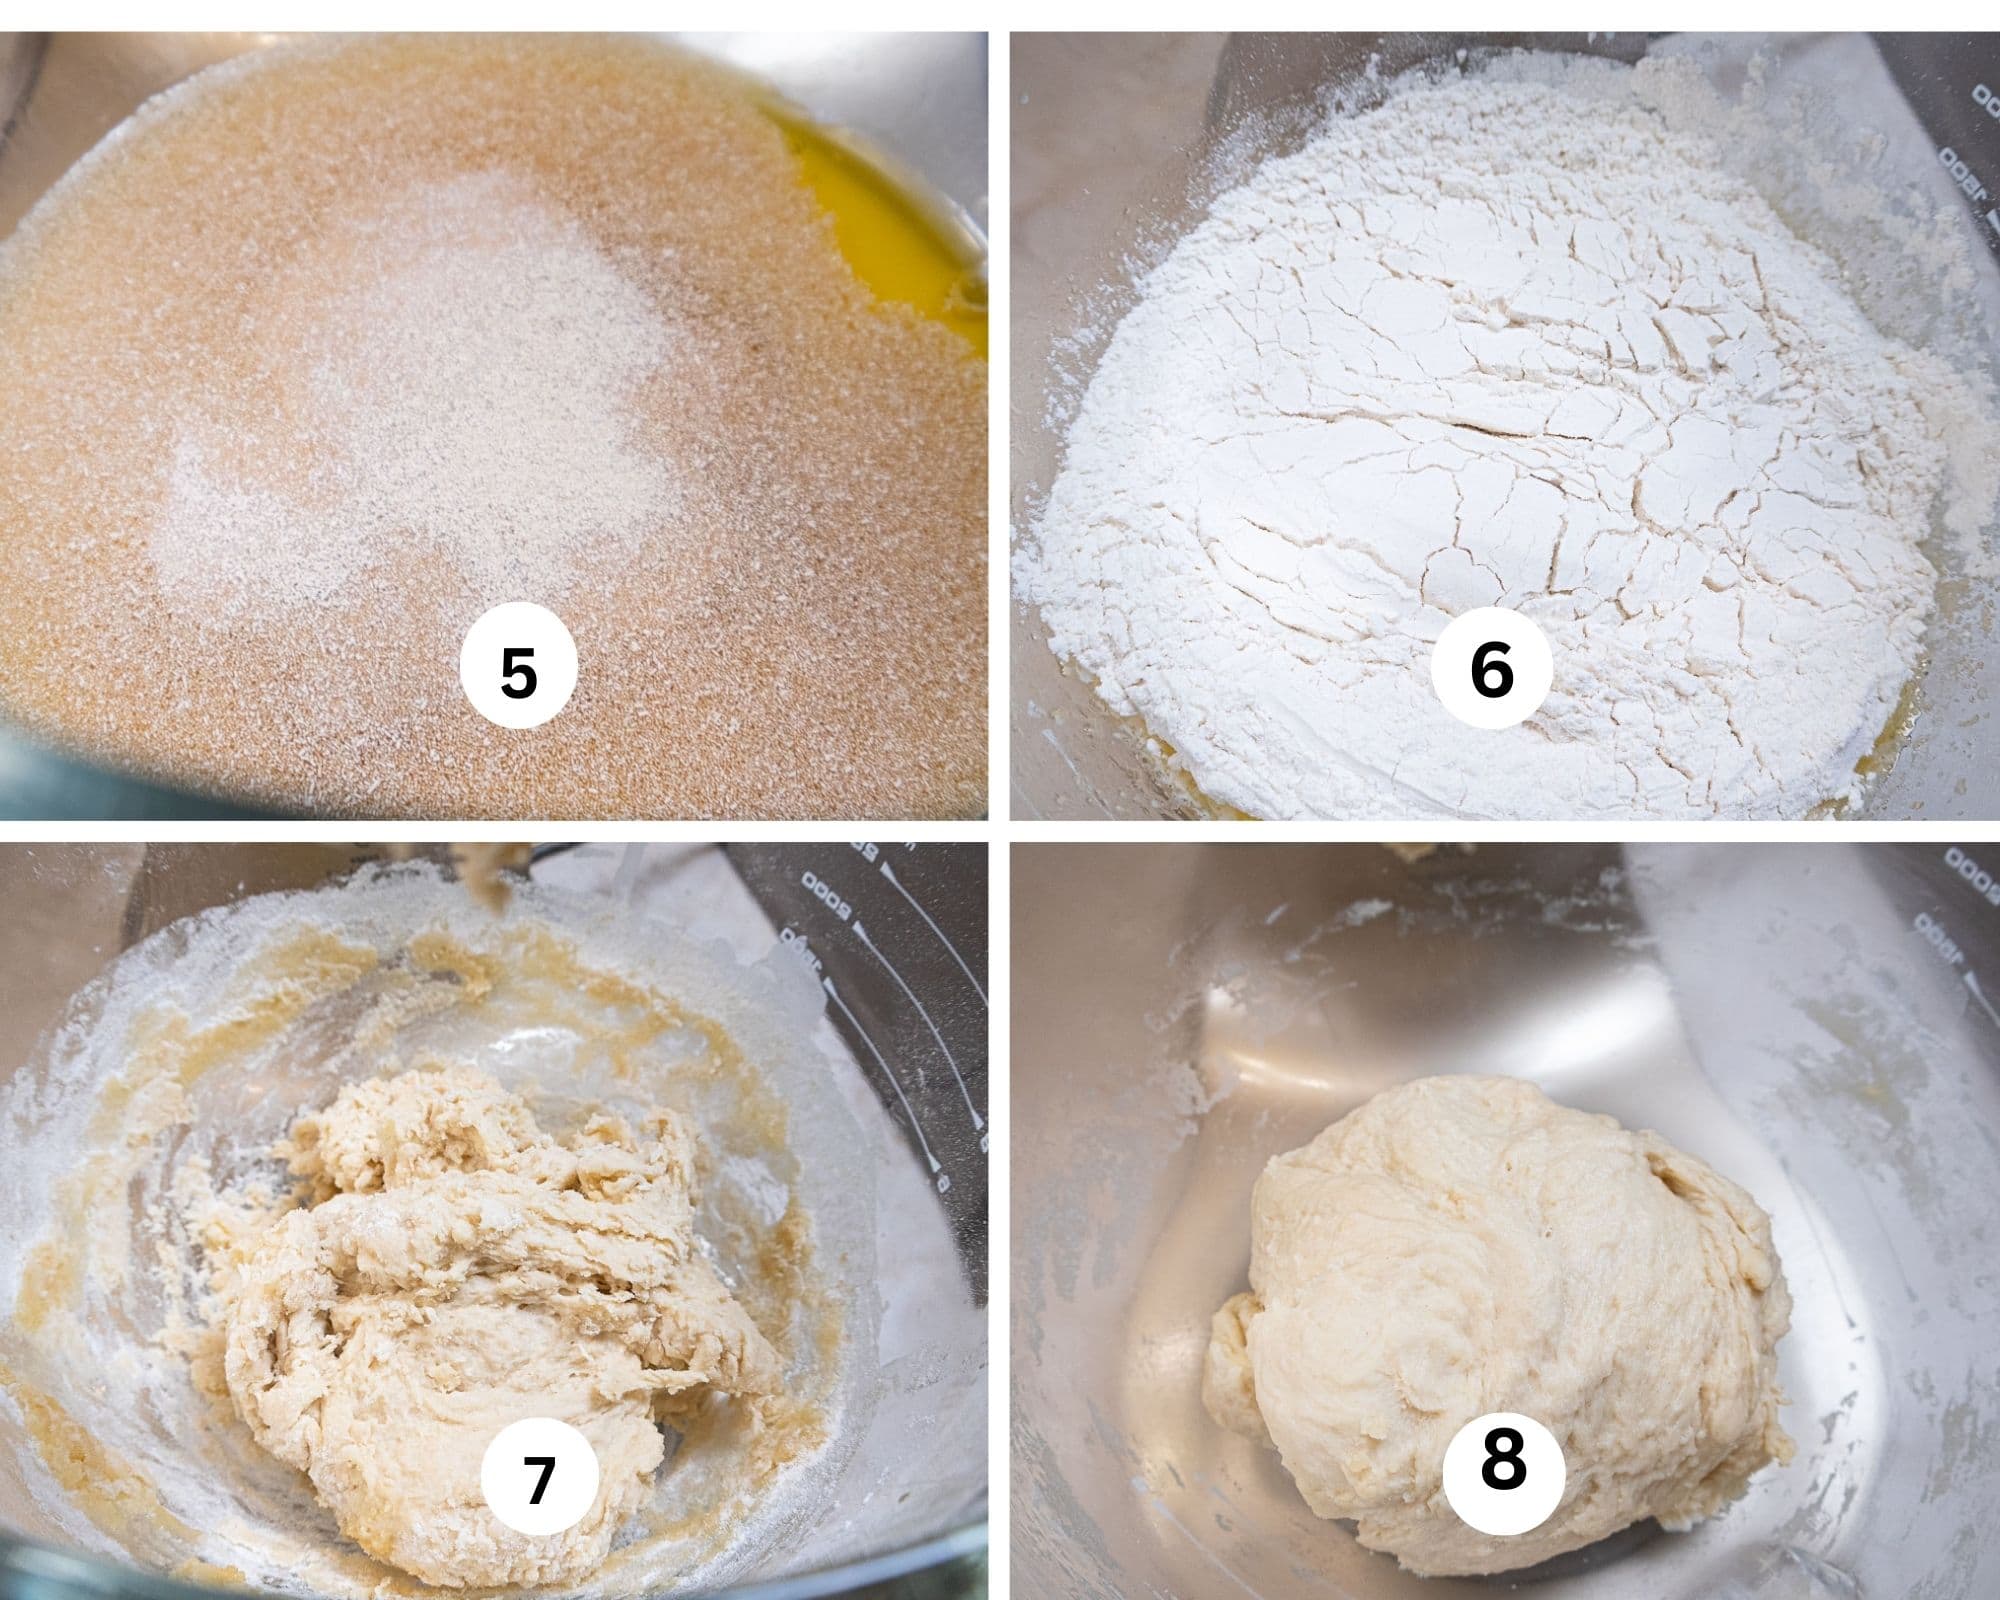 This collage shows the yeast combines with the liquid ingredients, the flour over the liquid ingredients in the mixing bowl, the dough initially mixed and then completely mixed.